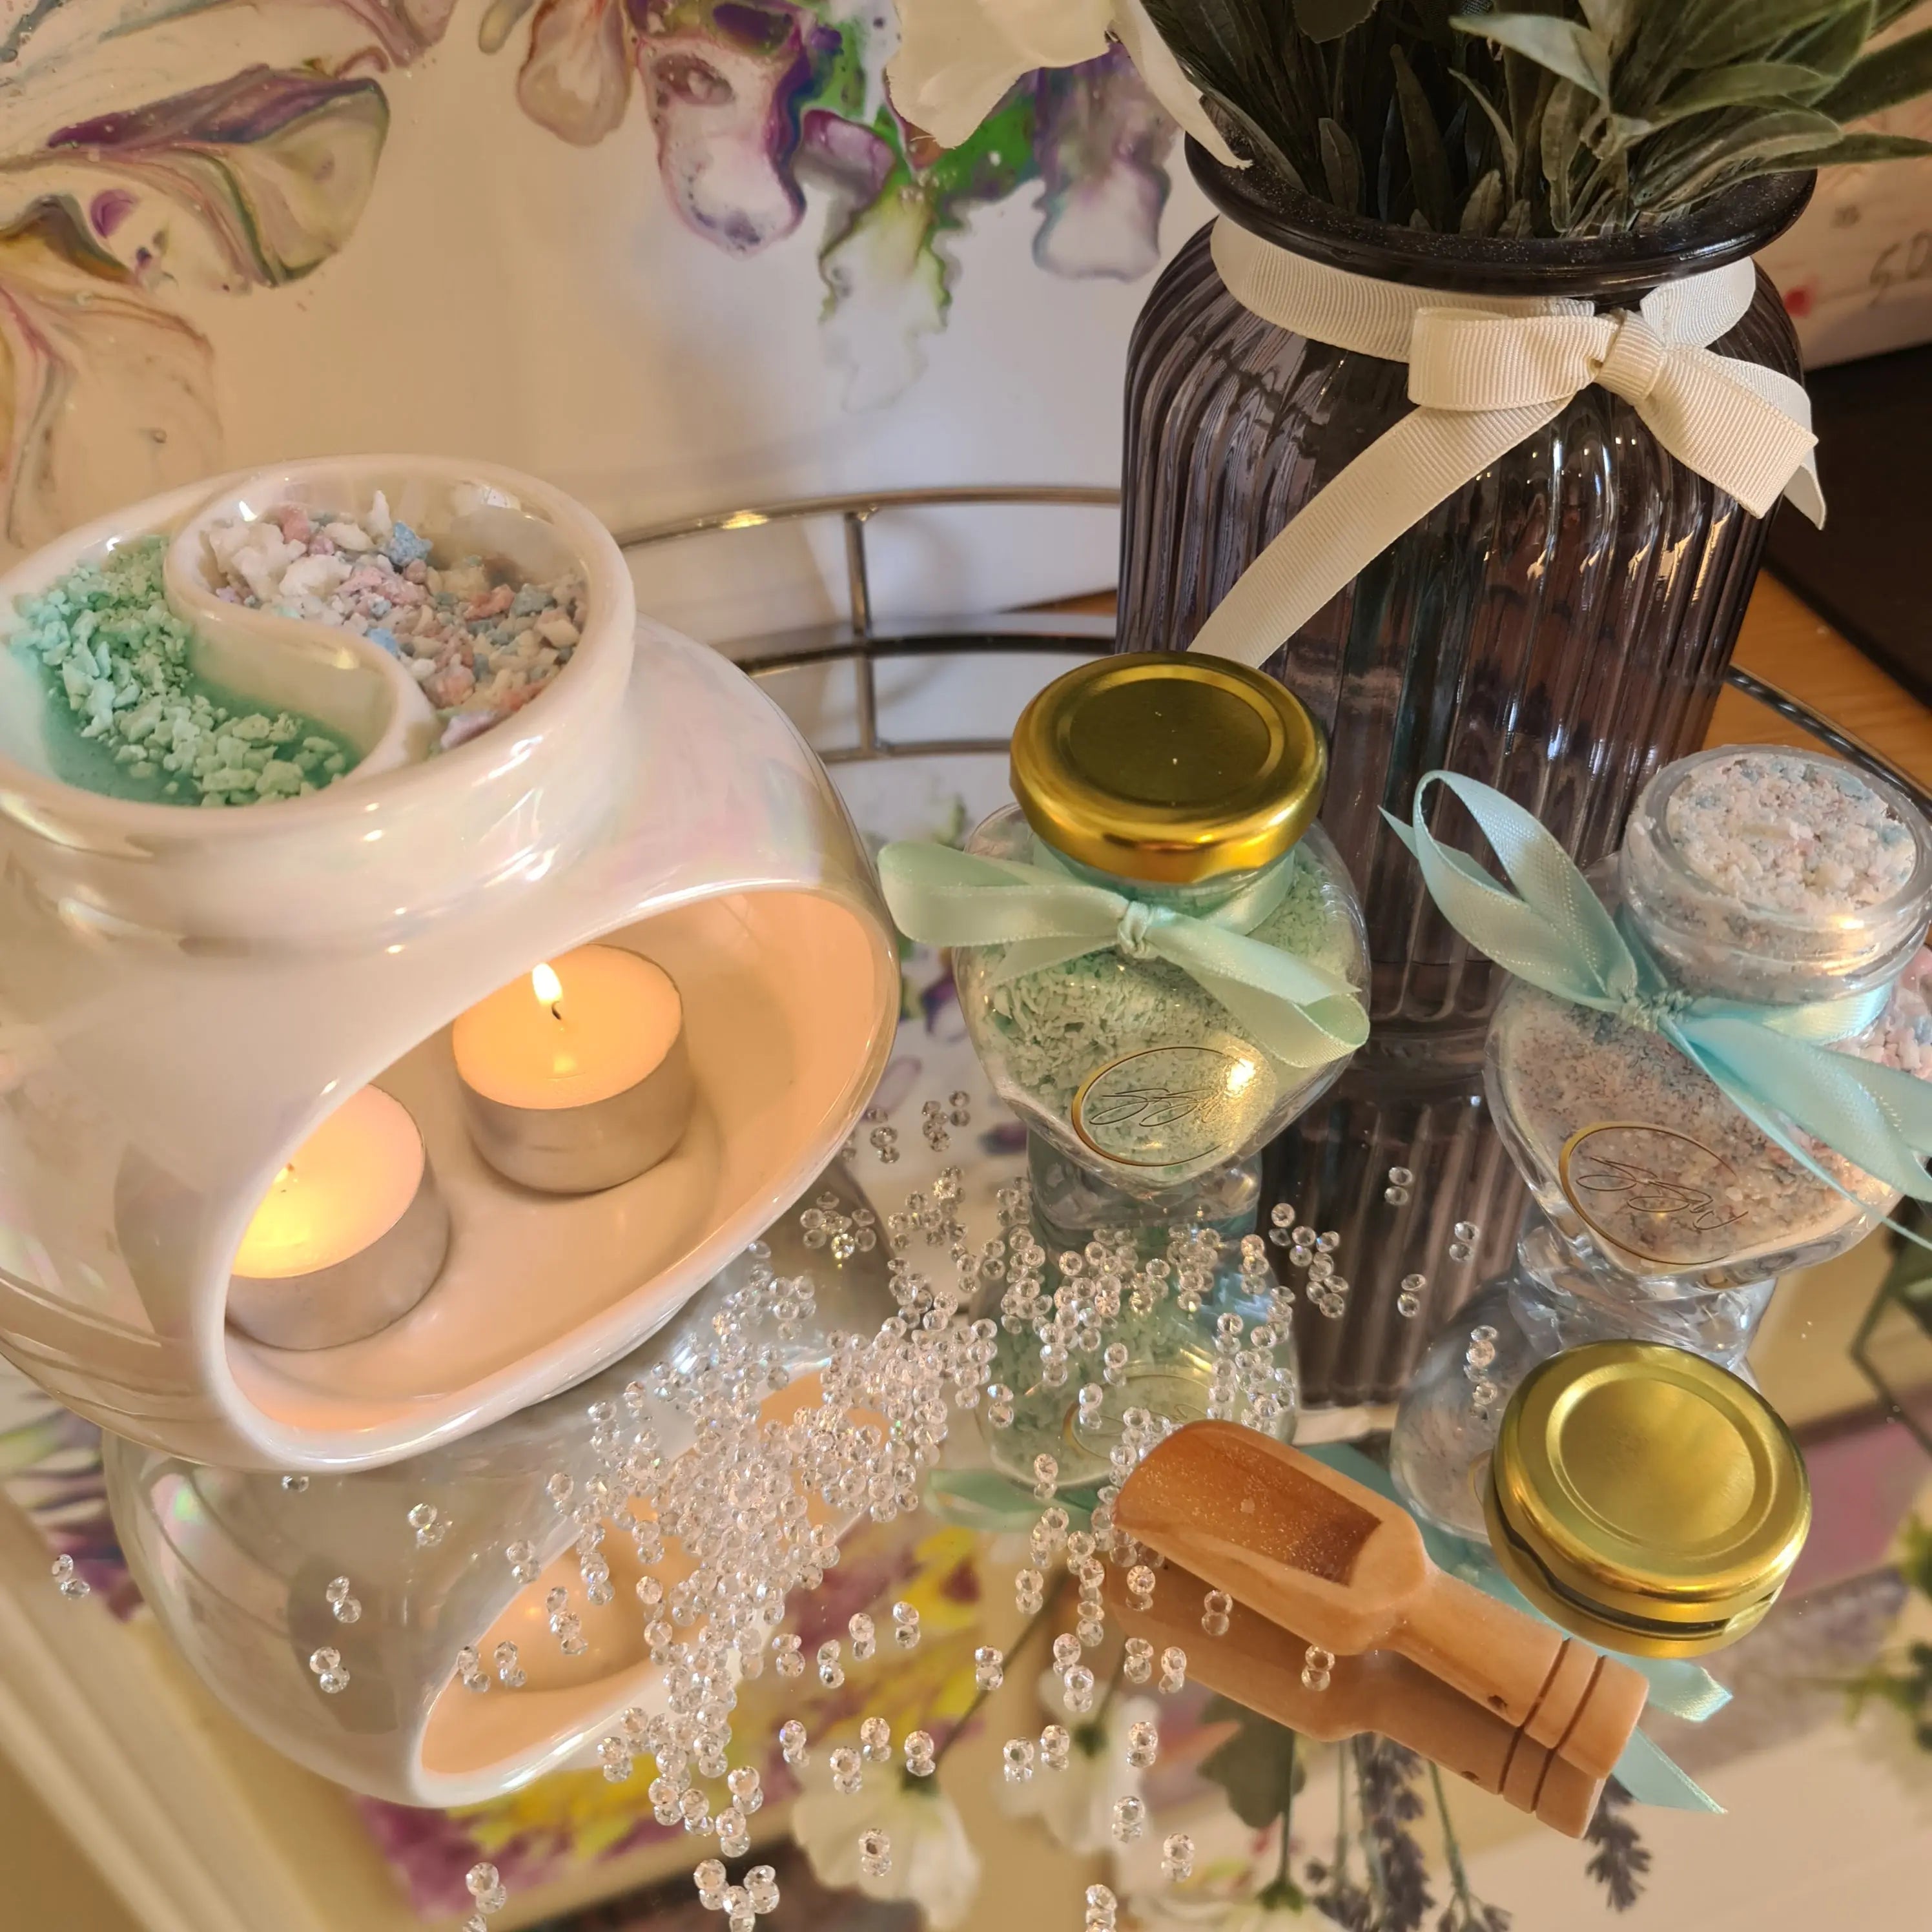 Yankee Candle Wax Melts Reviews - March 2022